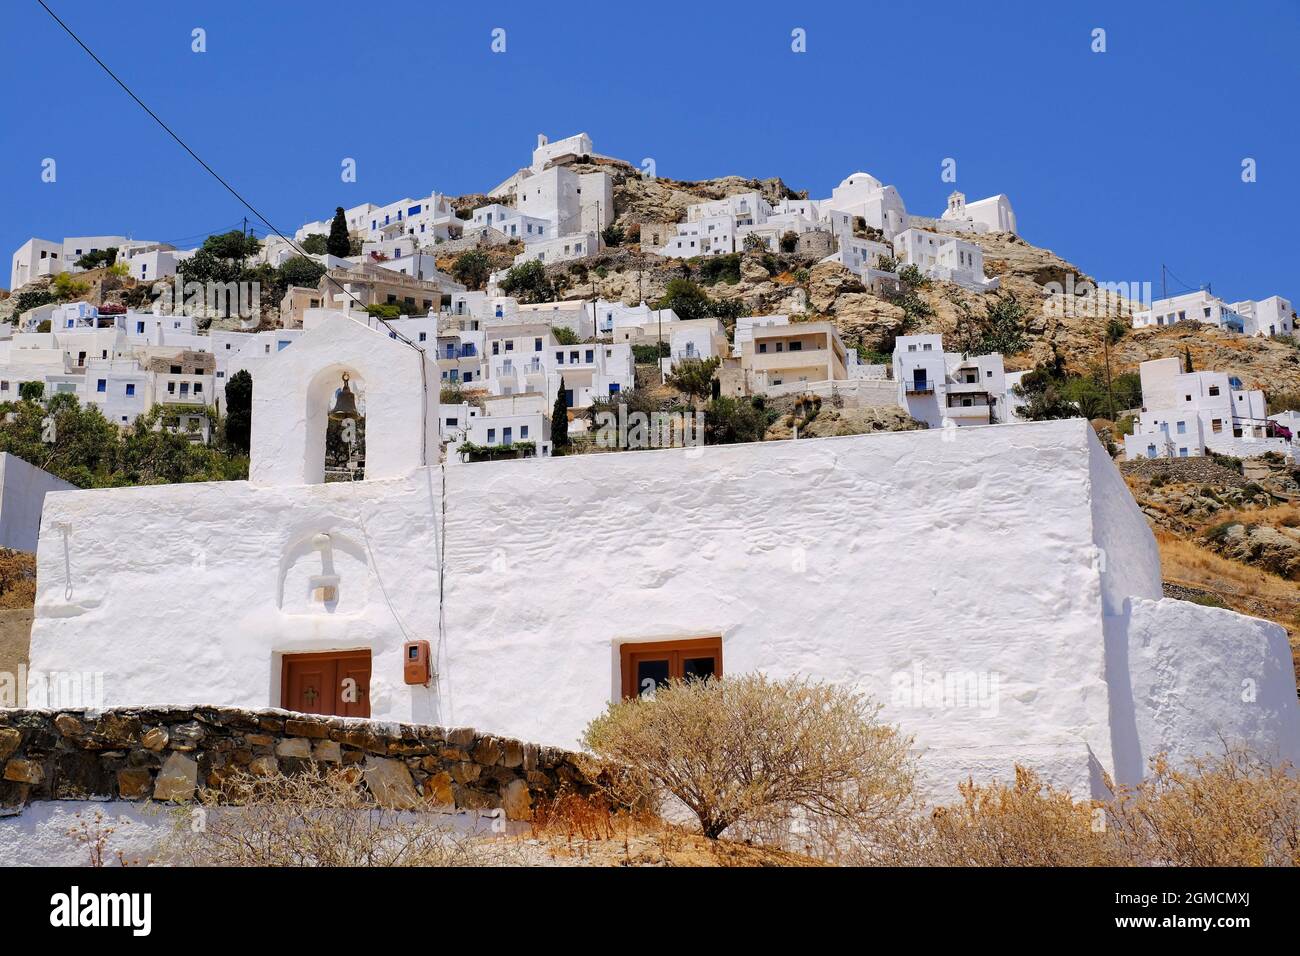 Looking up at Serifos Chora and its white chapels and buildings with a simple church in the foreground on Serifos Island, Cyclades, Greece Stock Photo